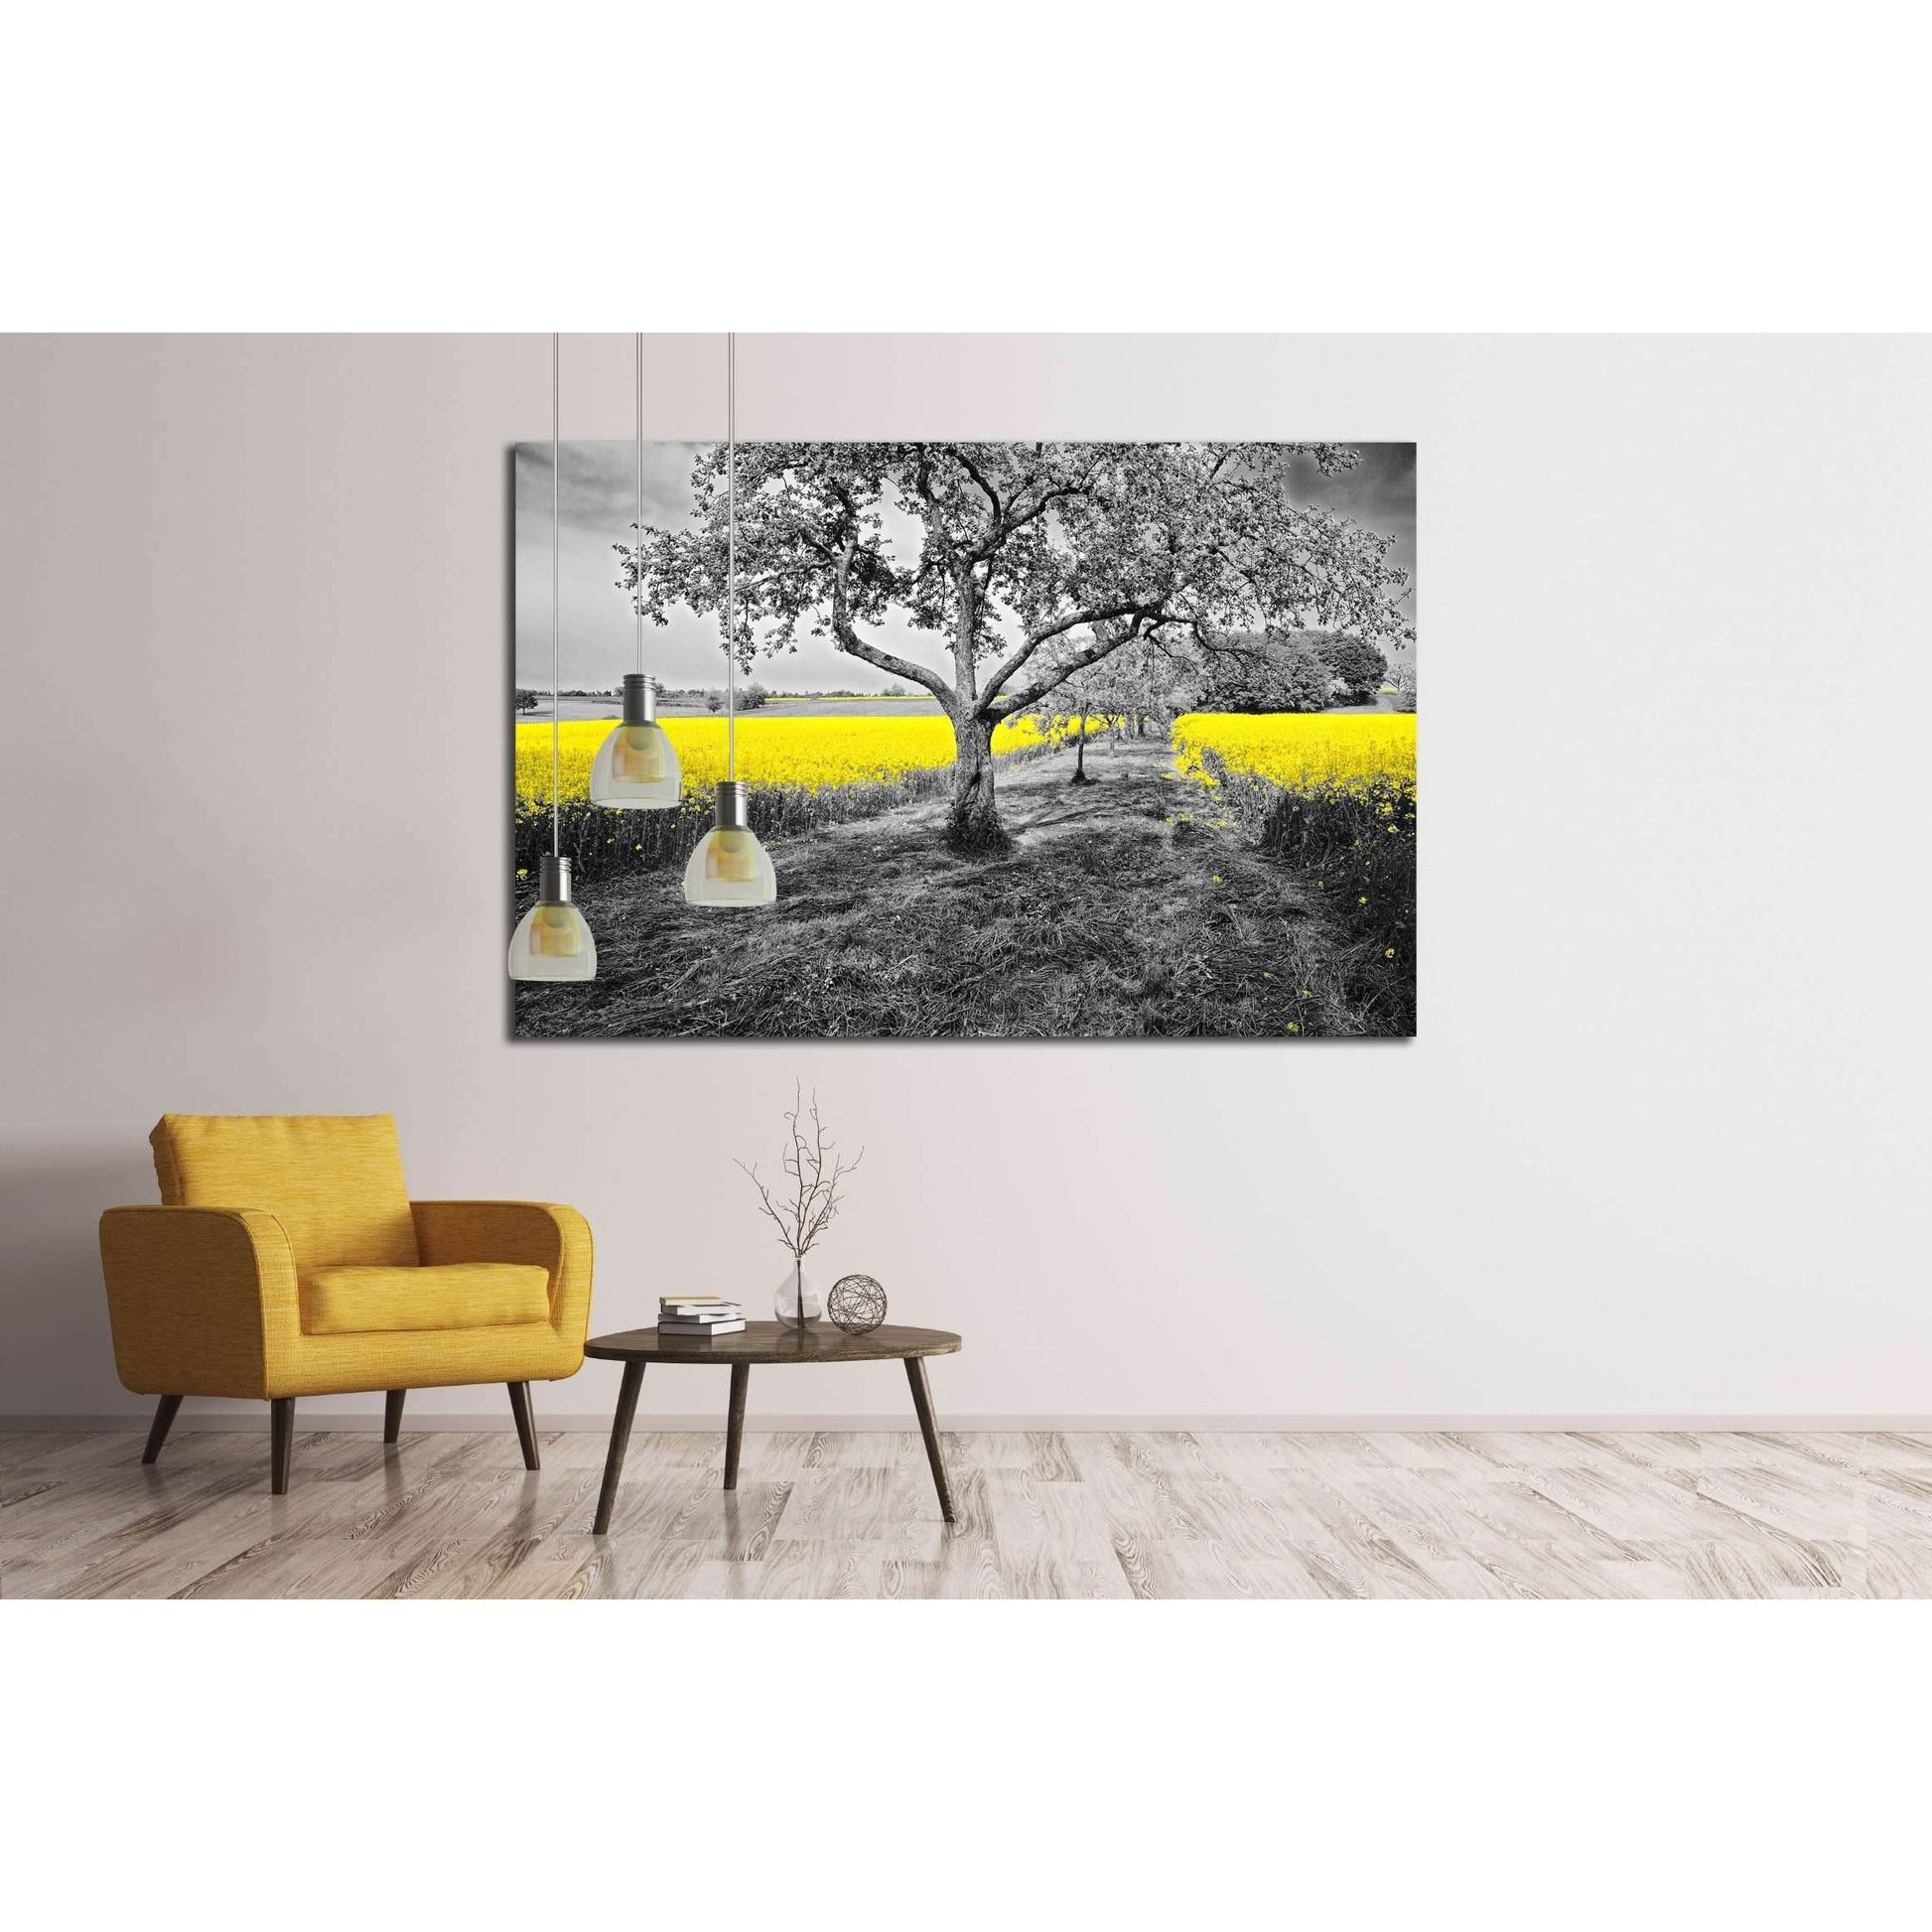 Artistic Tree in Field Canvas Art for Contemporary Office SpacesThis canvas print displays a striking black and white image of an old tree with a vivid yellow rapeseed field in the background, a selective color technique that adds a modern twist to any ro